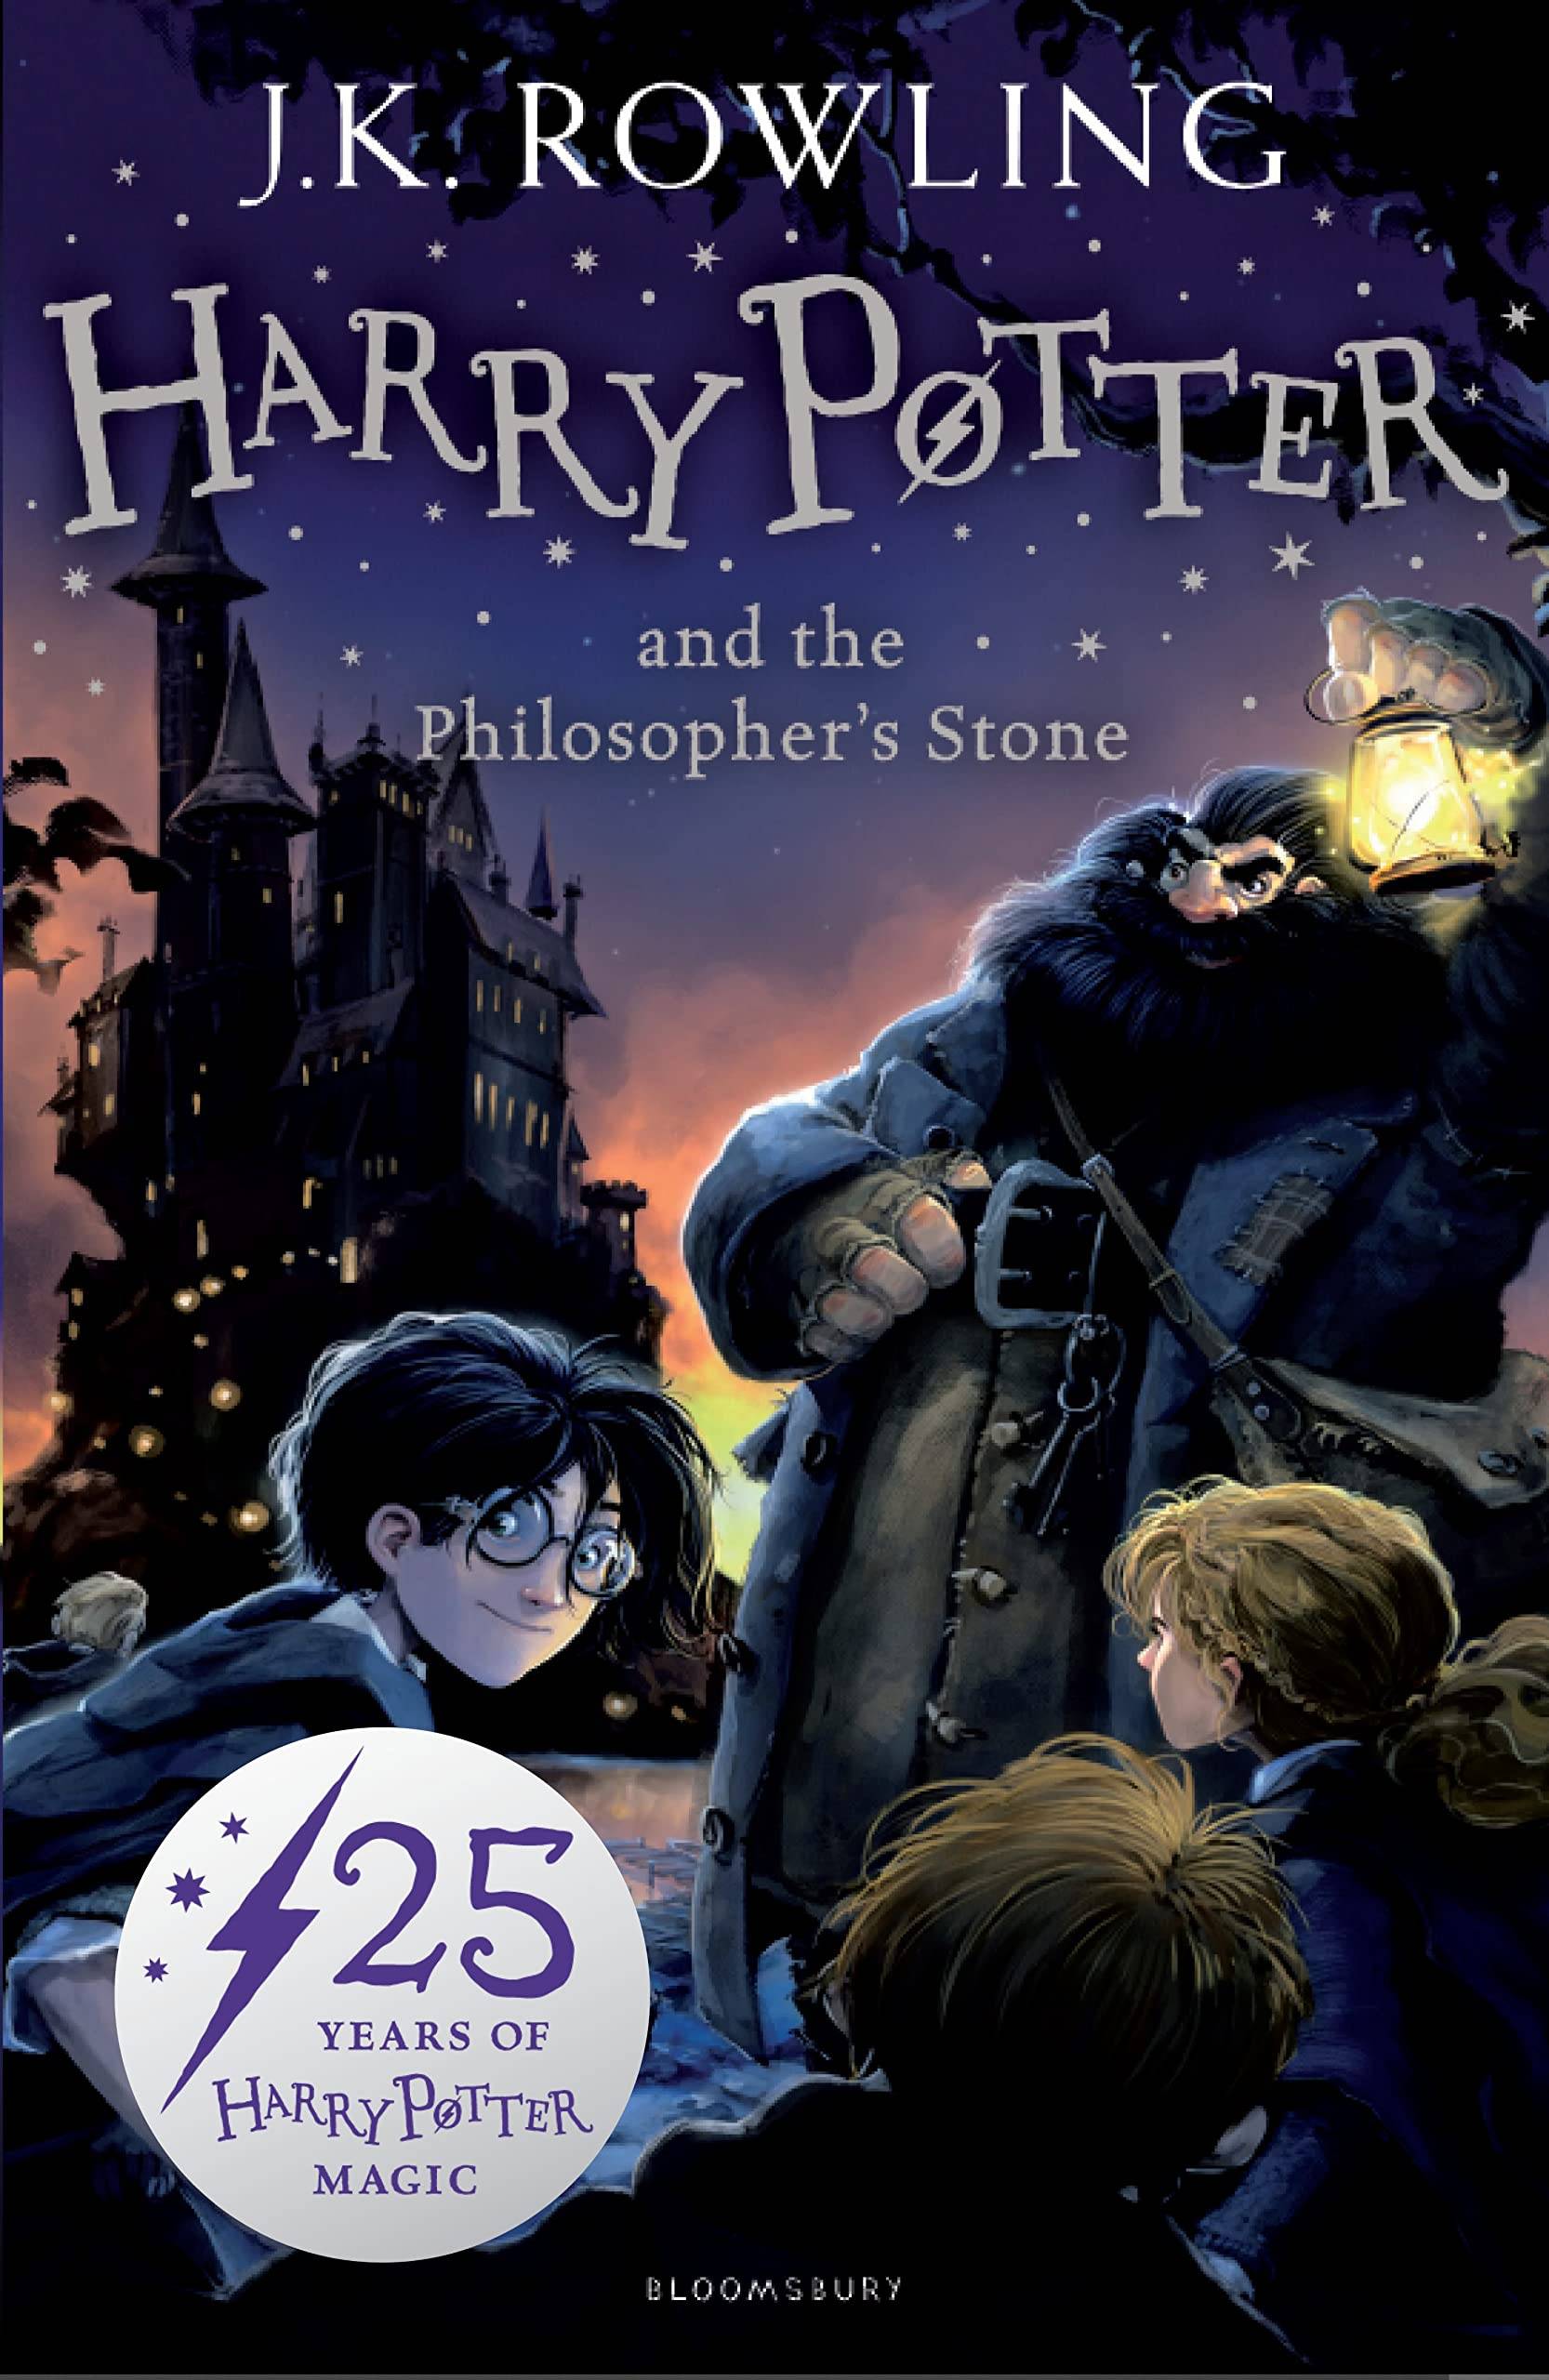 IMG : Harry Potter and the Philosophers stone